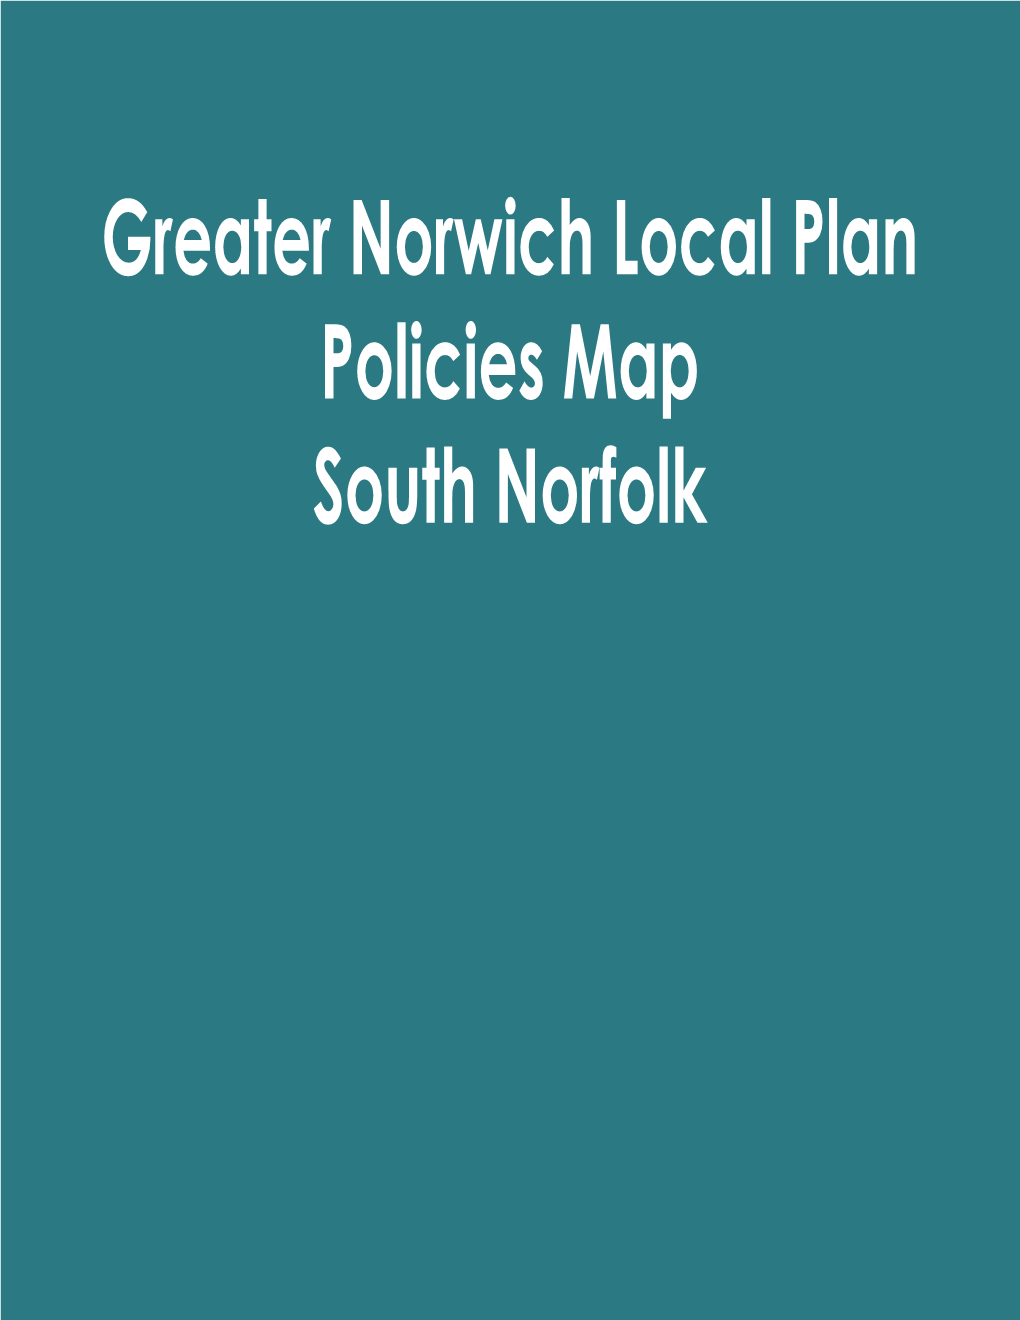 Greater Norwich Local Plan Policies Map South Norfolk